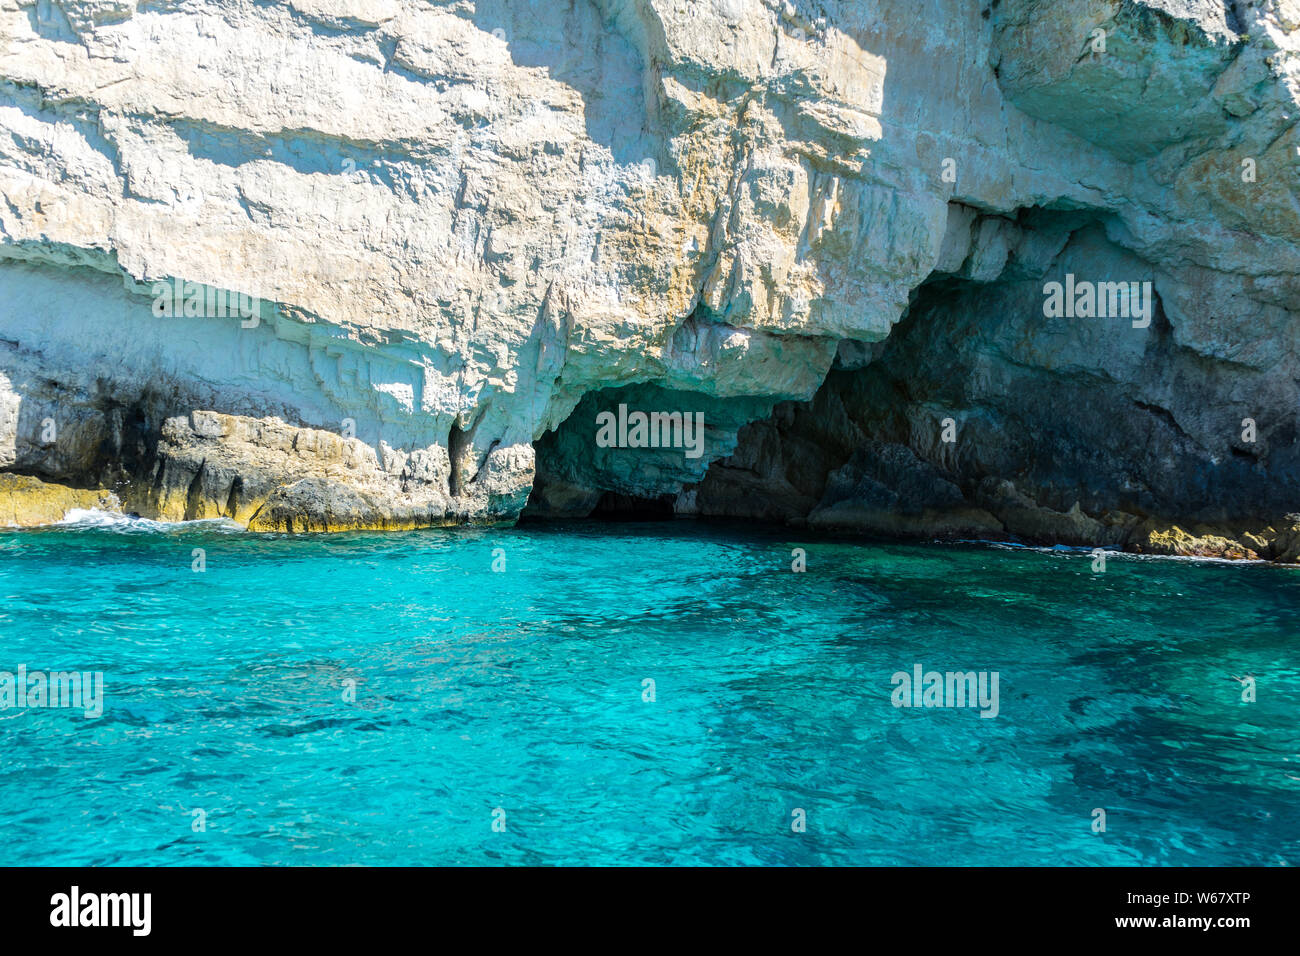 Greece, Zakynthos, Blue caves exiting sight to visit Stock Photo